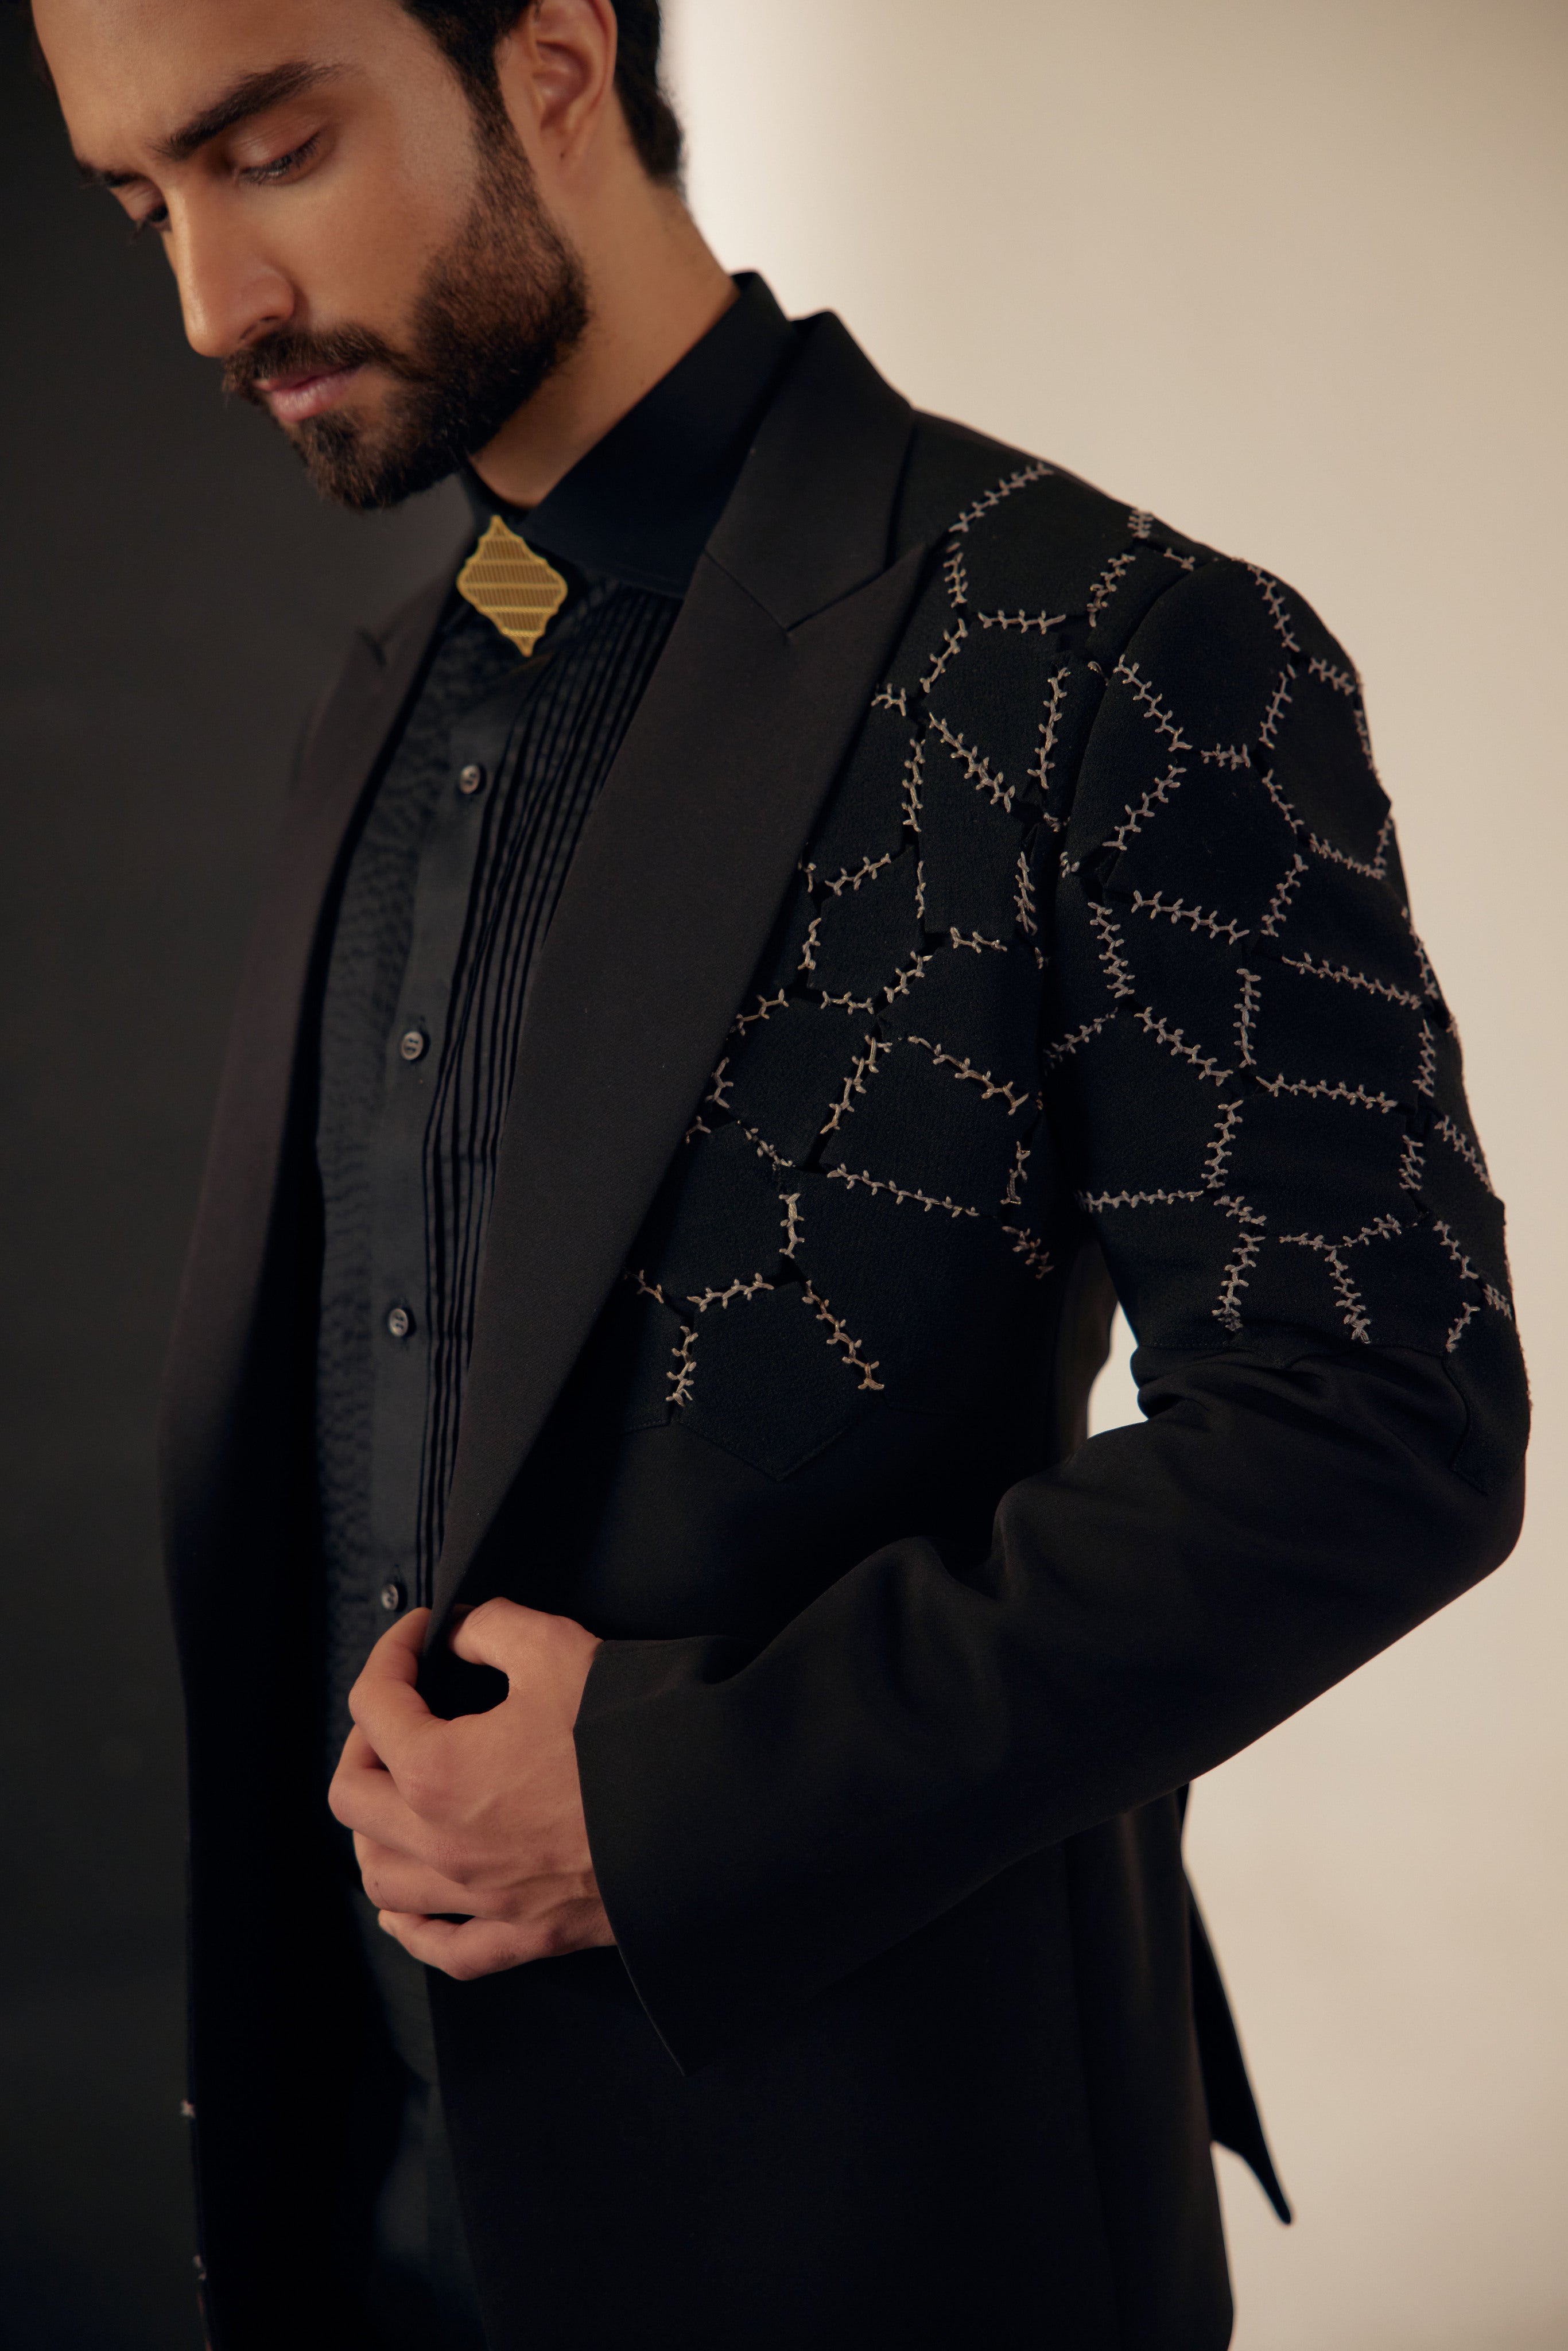 Rhombus Tux: Perfectly tailored for a distinct and stylish look.